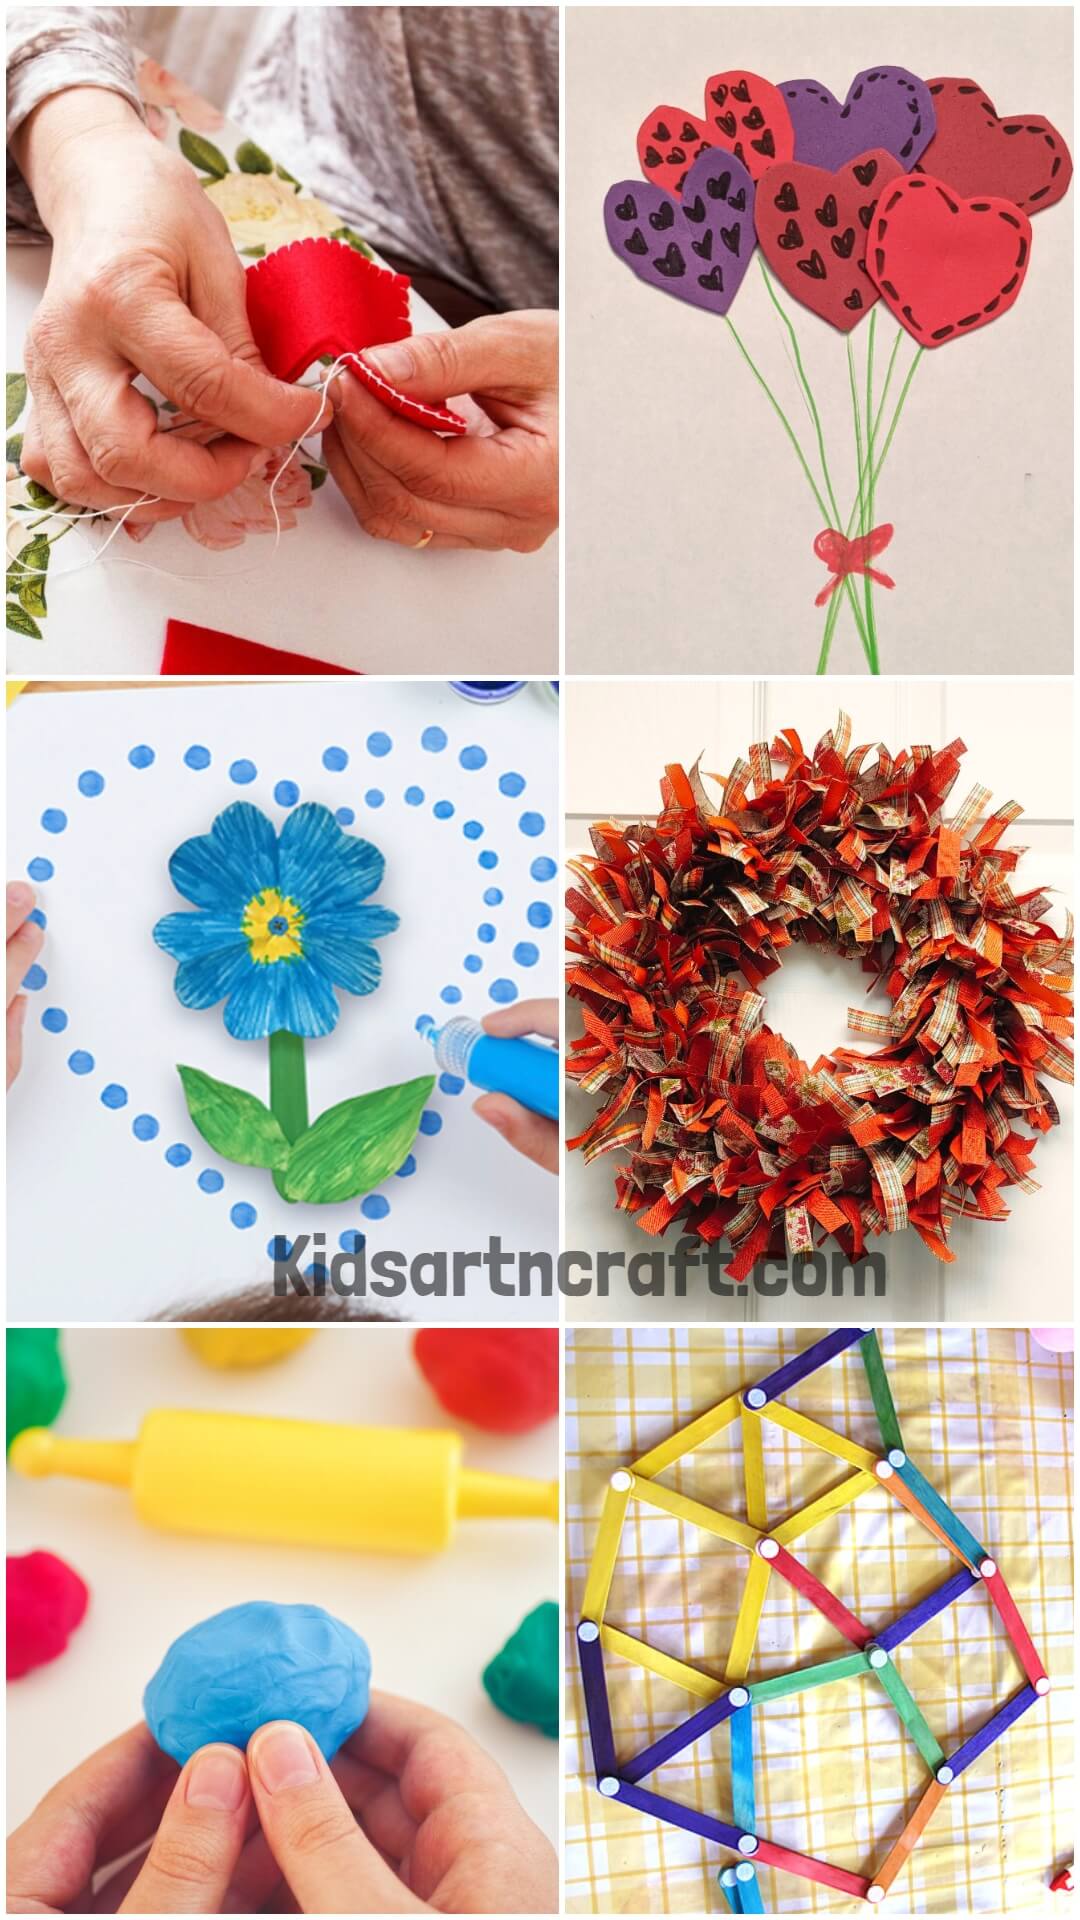 Easy Crafts for Seniors with Dementia - Kids Art & Craft